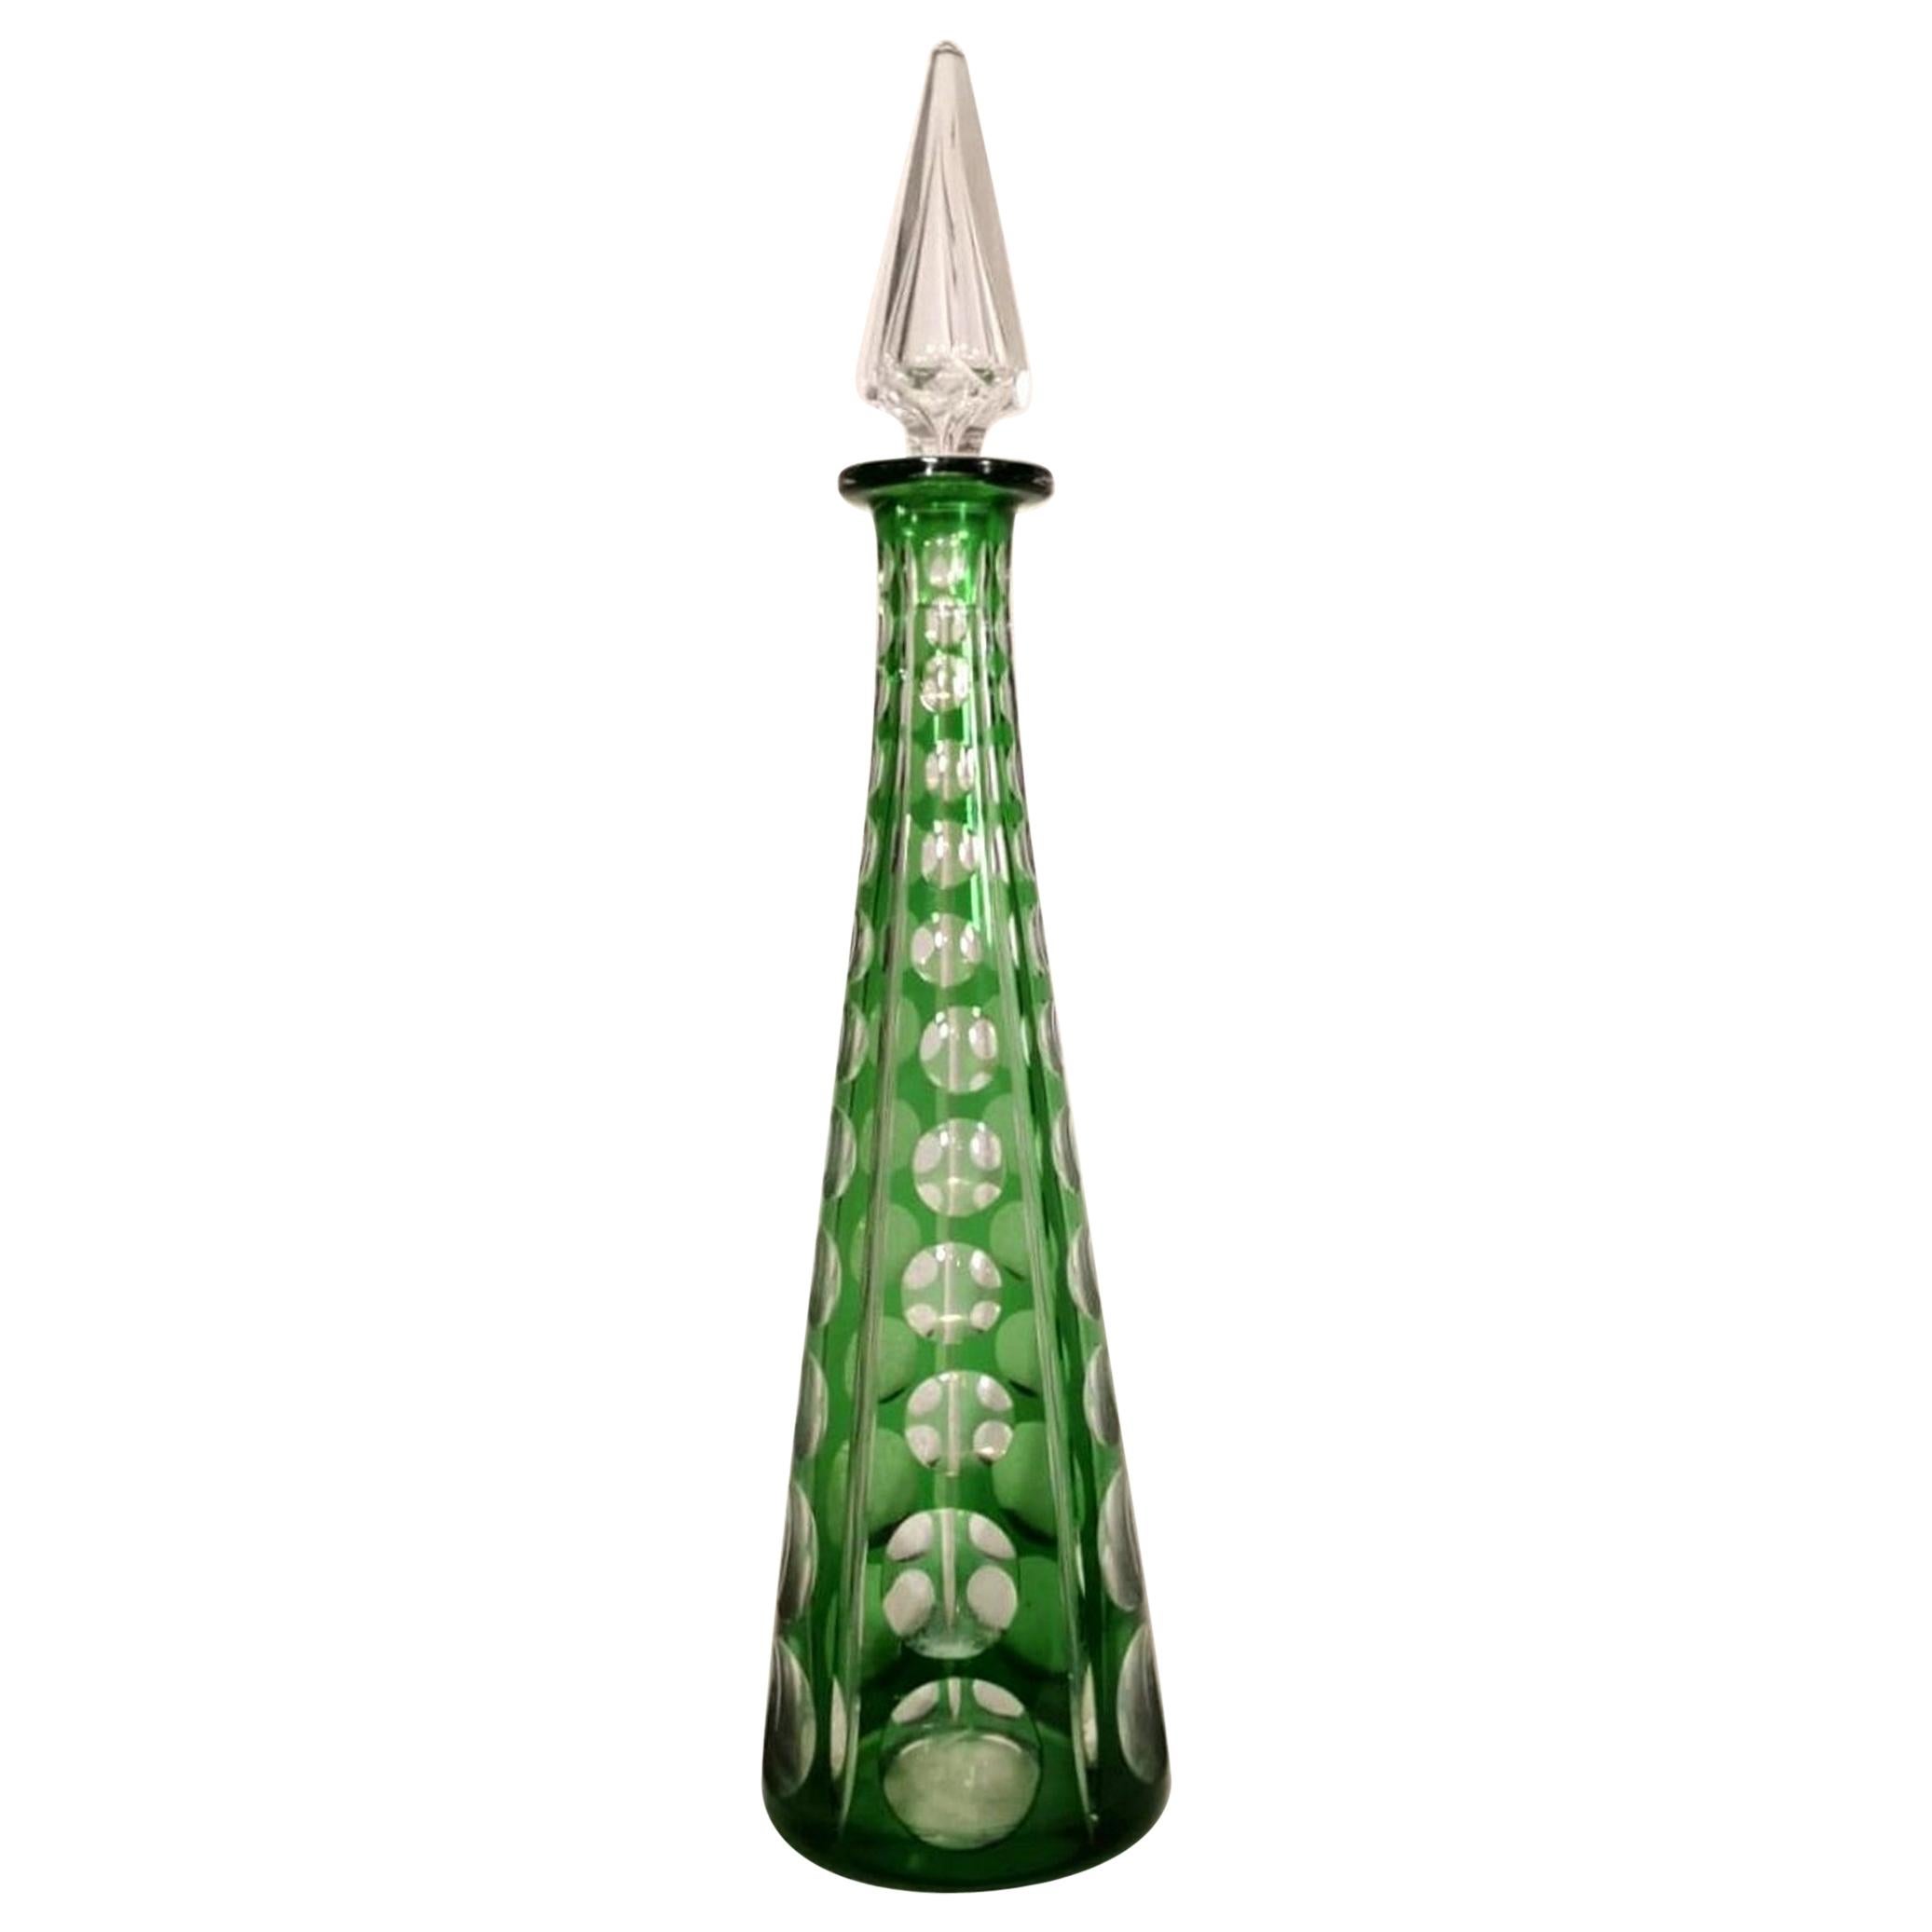 20th Century  Green Crystal French Decanter  1905-1910